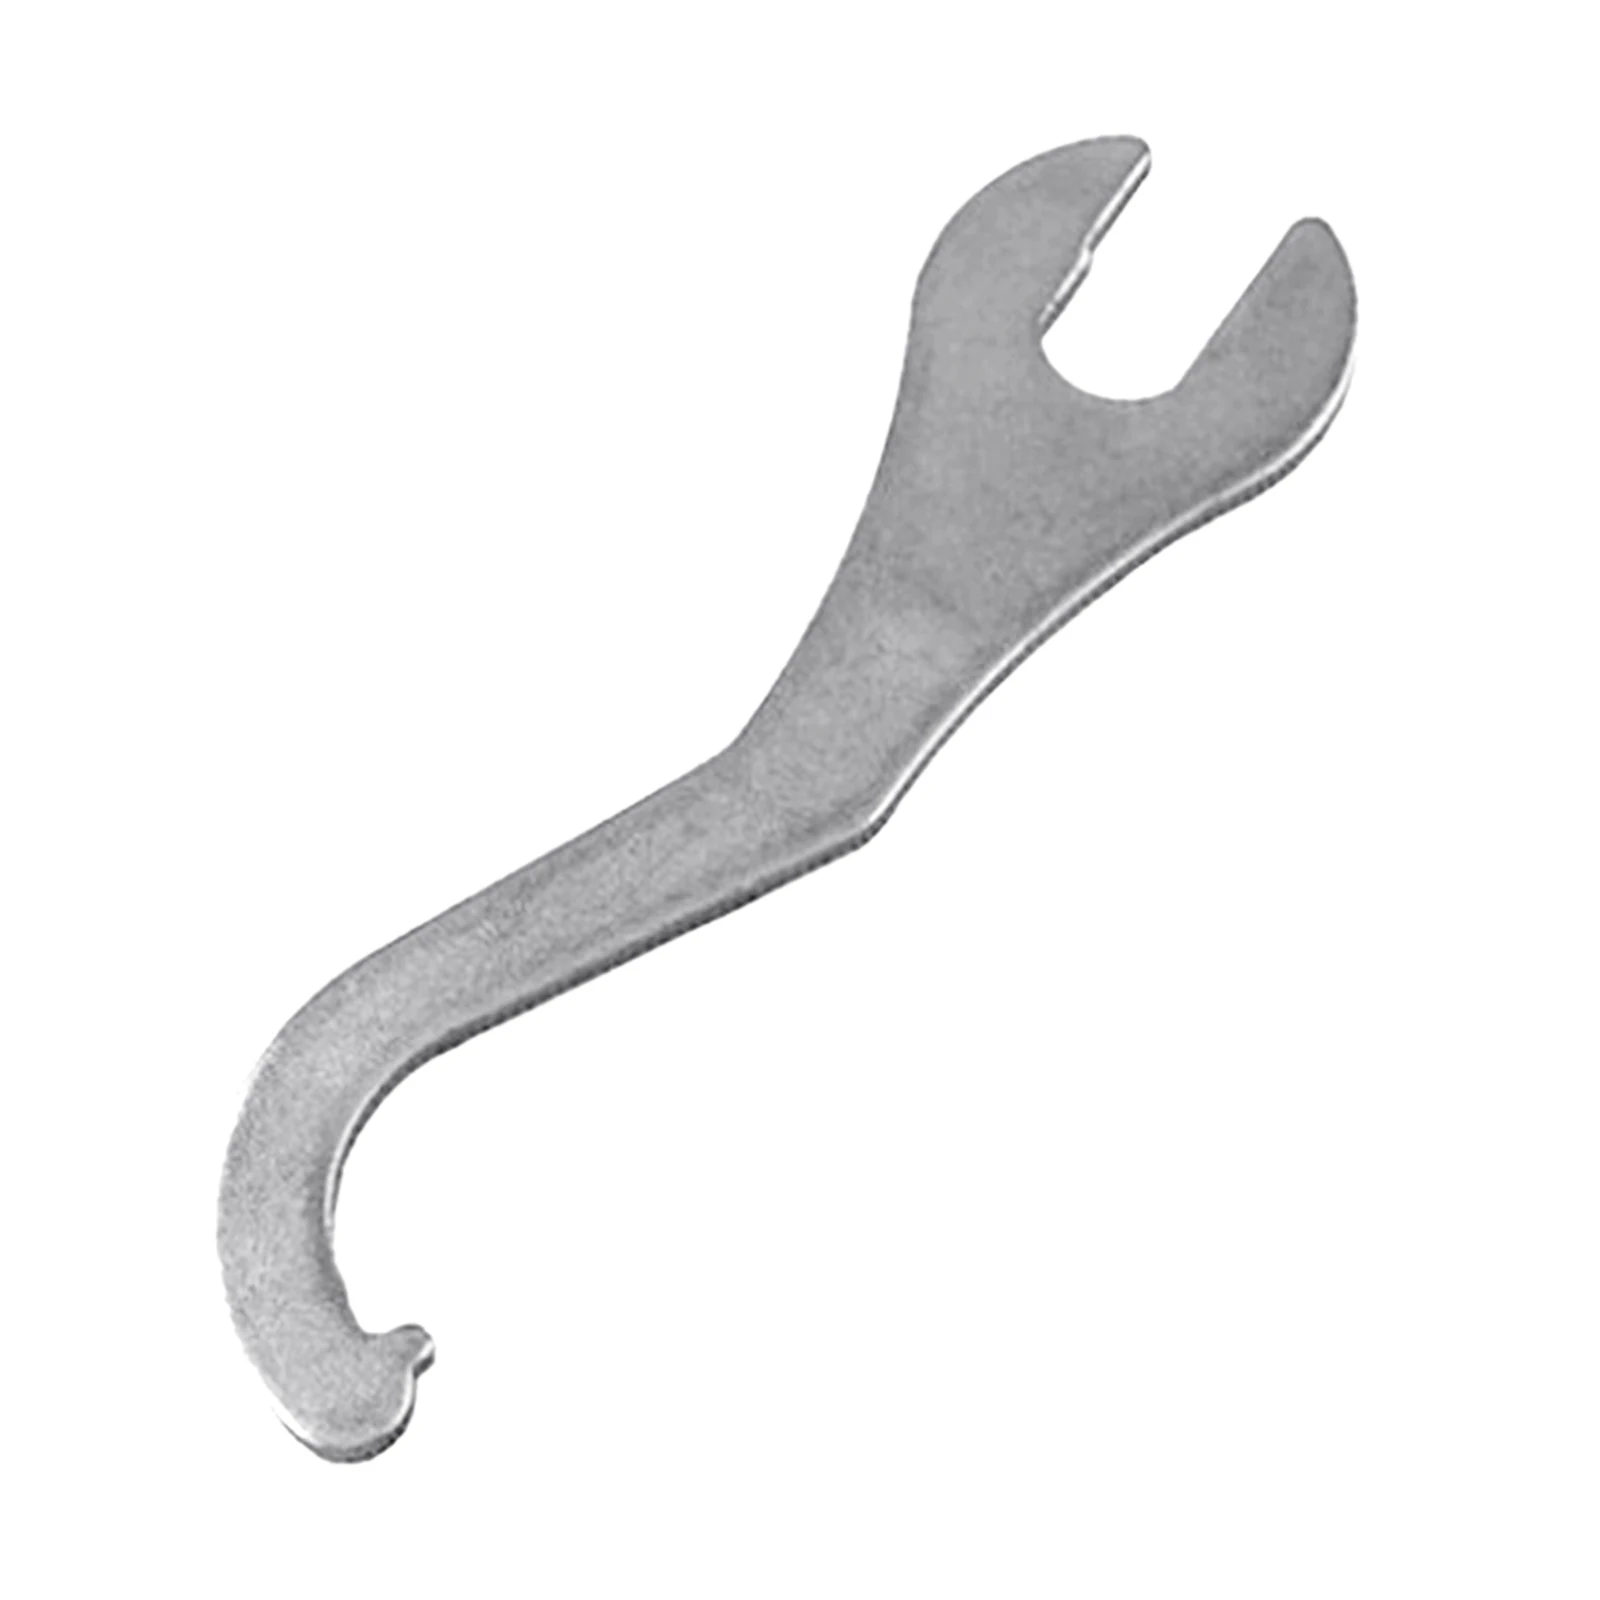 Bike Crank Extractor Arm Remover and Bottom Bracket Remover Lock Ring Repair Tool Steel Spanner/Wrench Tool Bicycle Repair Tool